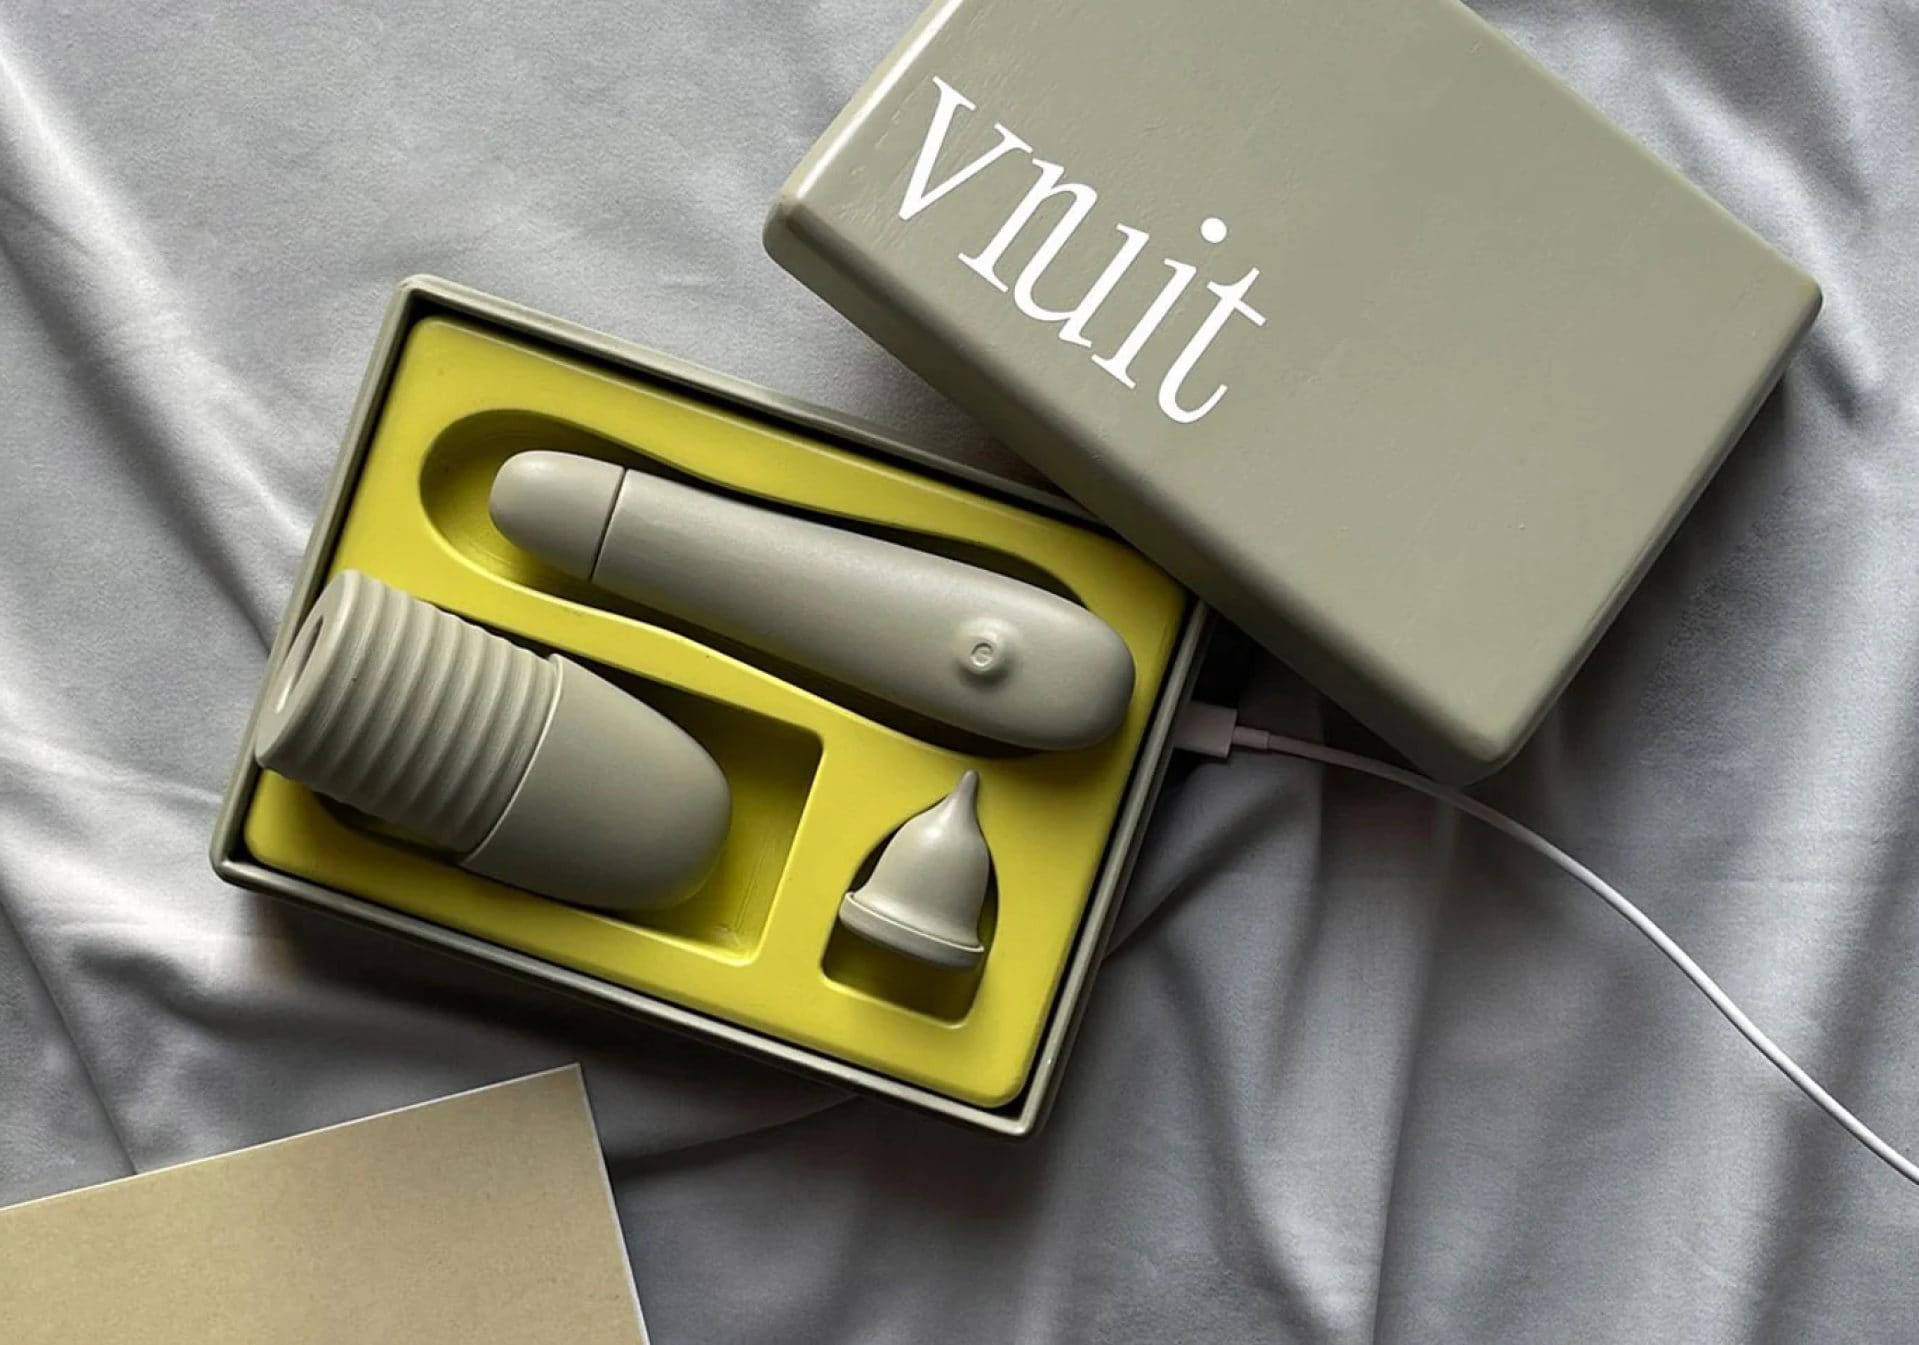 A yellow box equipped with a self-insemination kit, designed for queer people seeking an orgasm-focused experience.